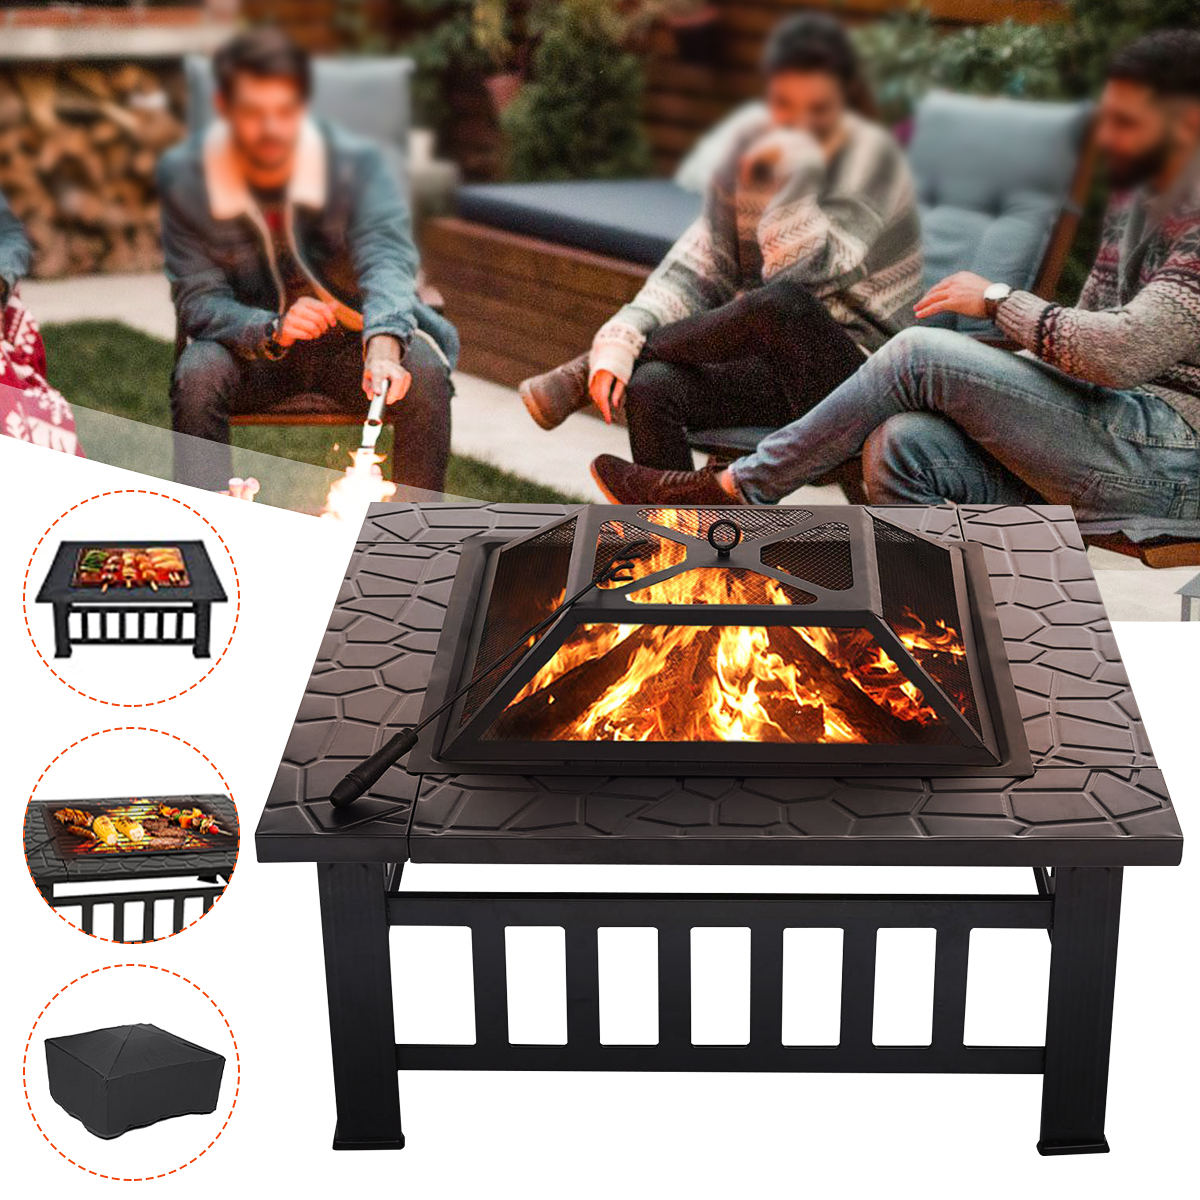 Kingso-32-Inch-Fire-Pit-Square-Steel-Wood-Burning-Large-Firepits-with-Waterproof-Cover-Spark-ScreenL-1787362-10